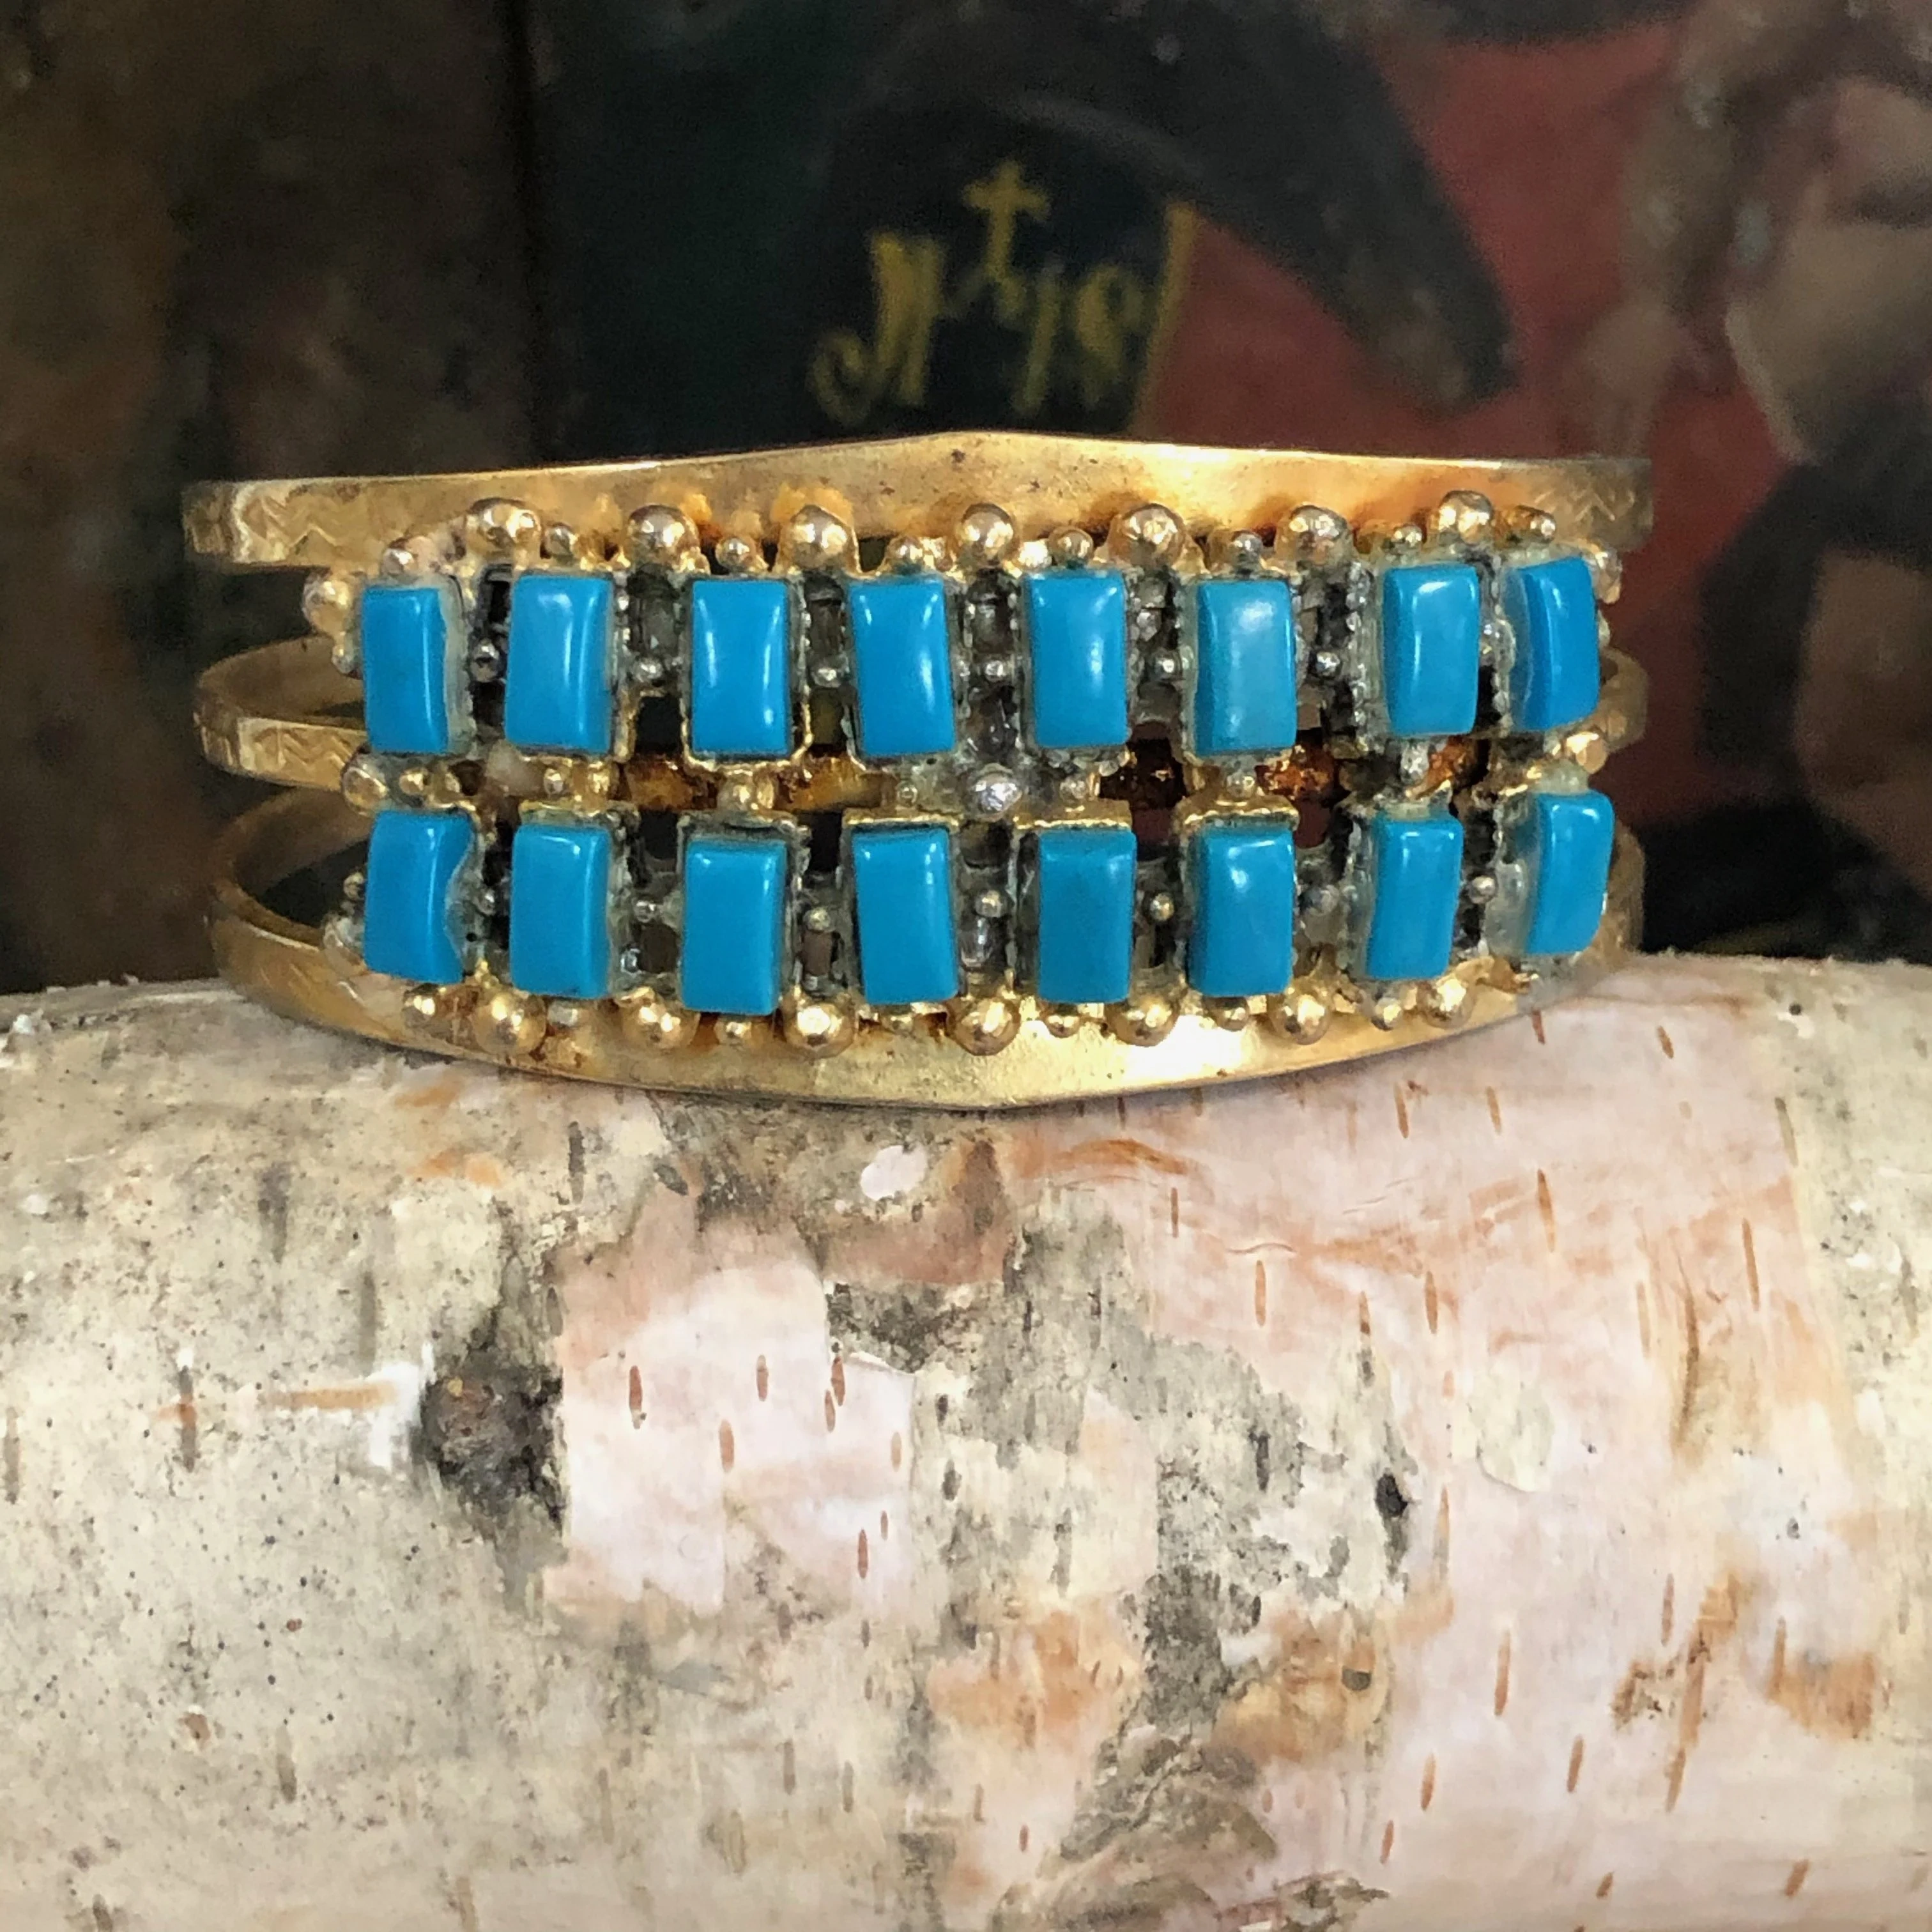 Vintage Costume Grade Gold Tone and Faux Turquoise Row Bracelet